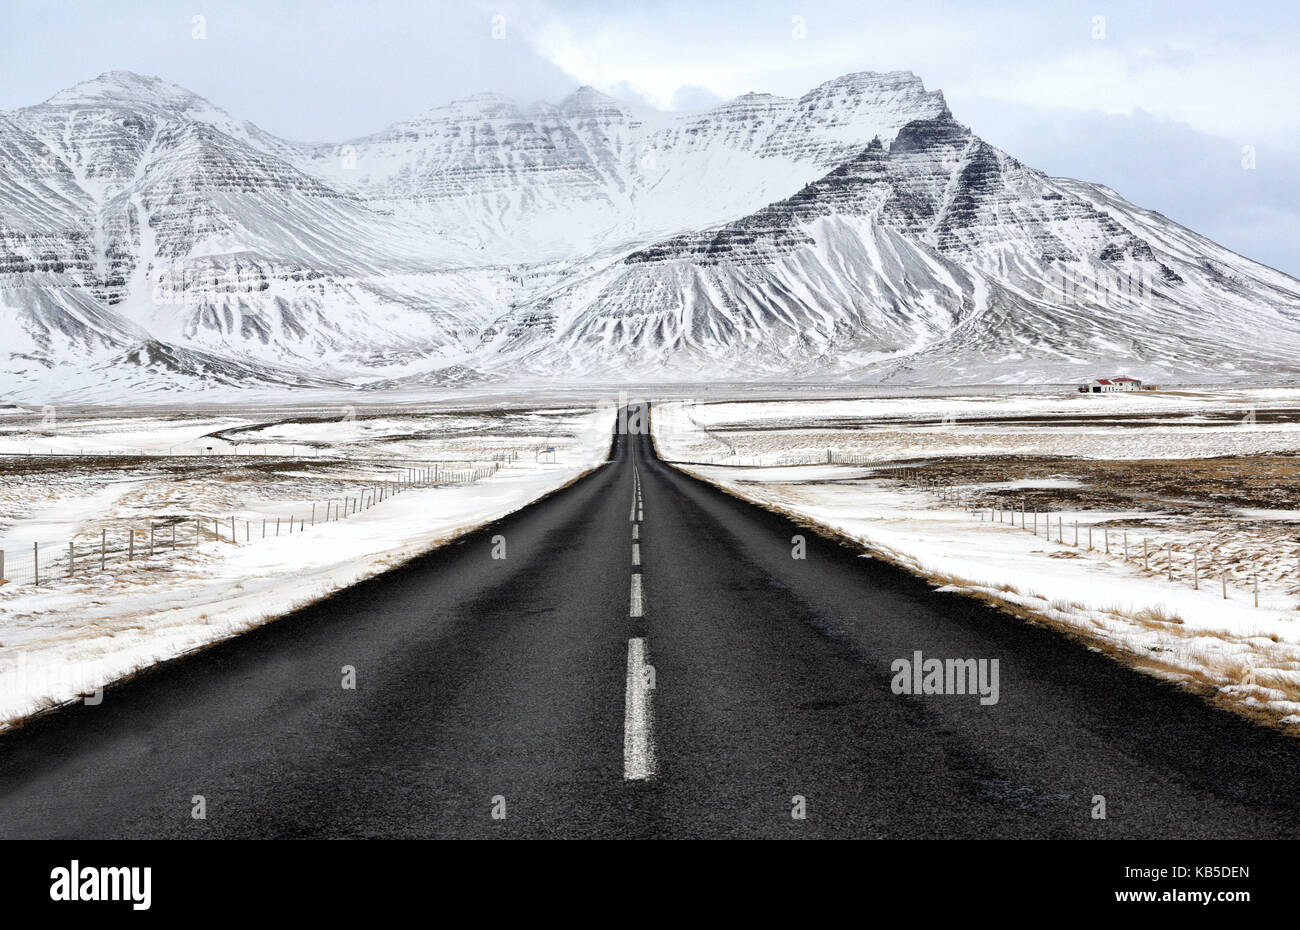 Black tarmac road leading towards snow covered mountains in winter, South Iceland, Polar Regions Stock Photo